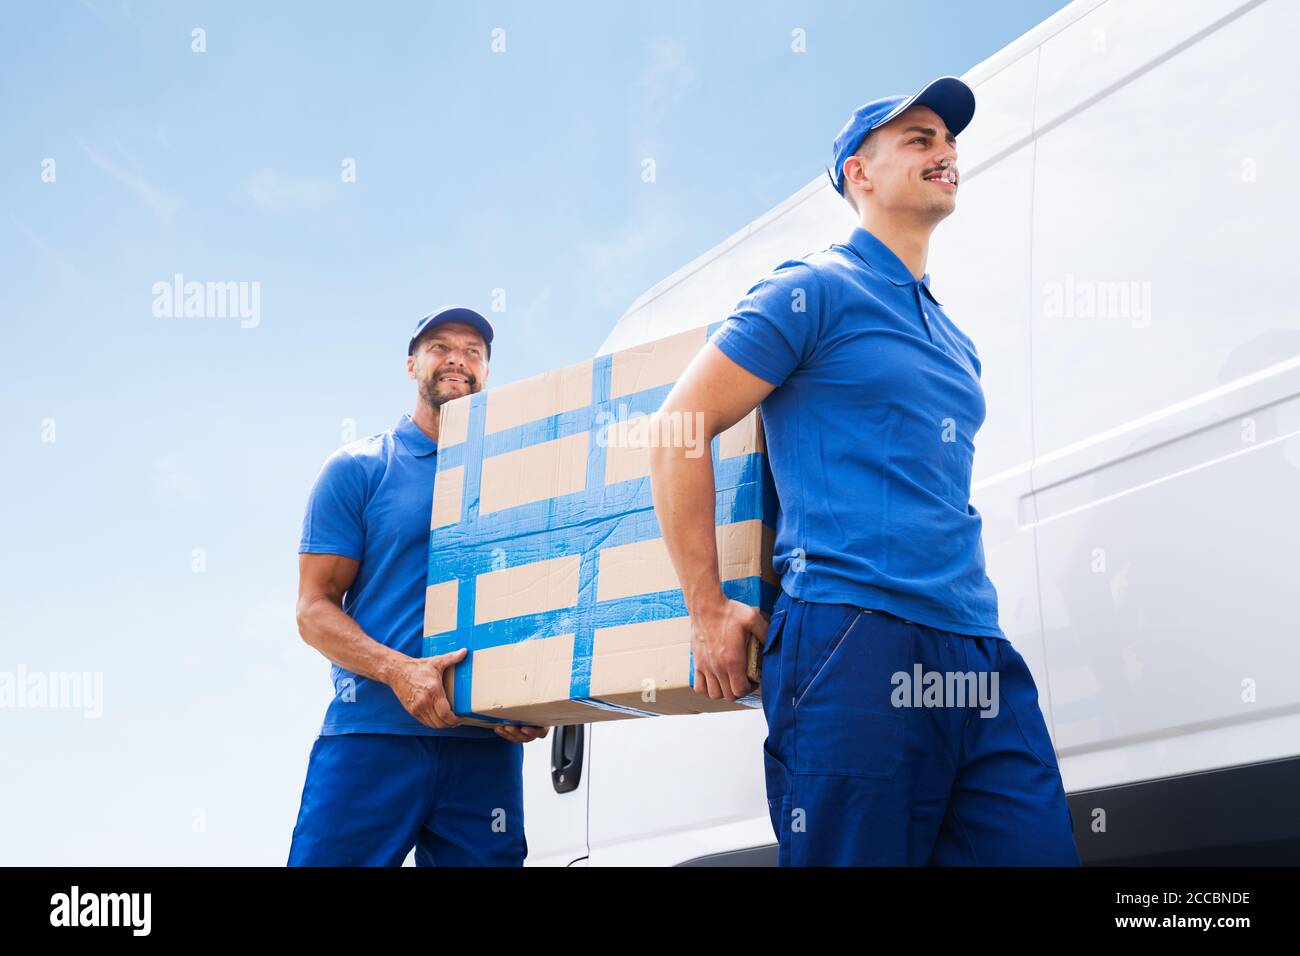 Delivery And Removal. 2 Movers Near Van. Side View Stock Photo